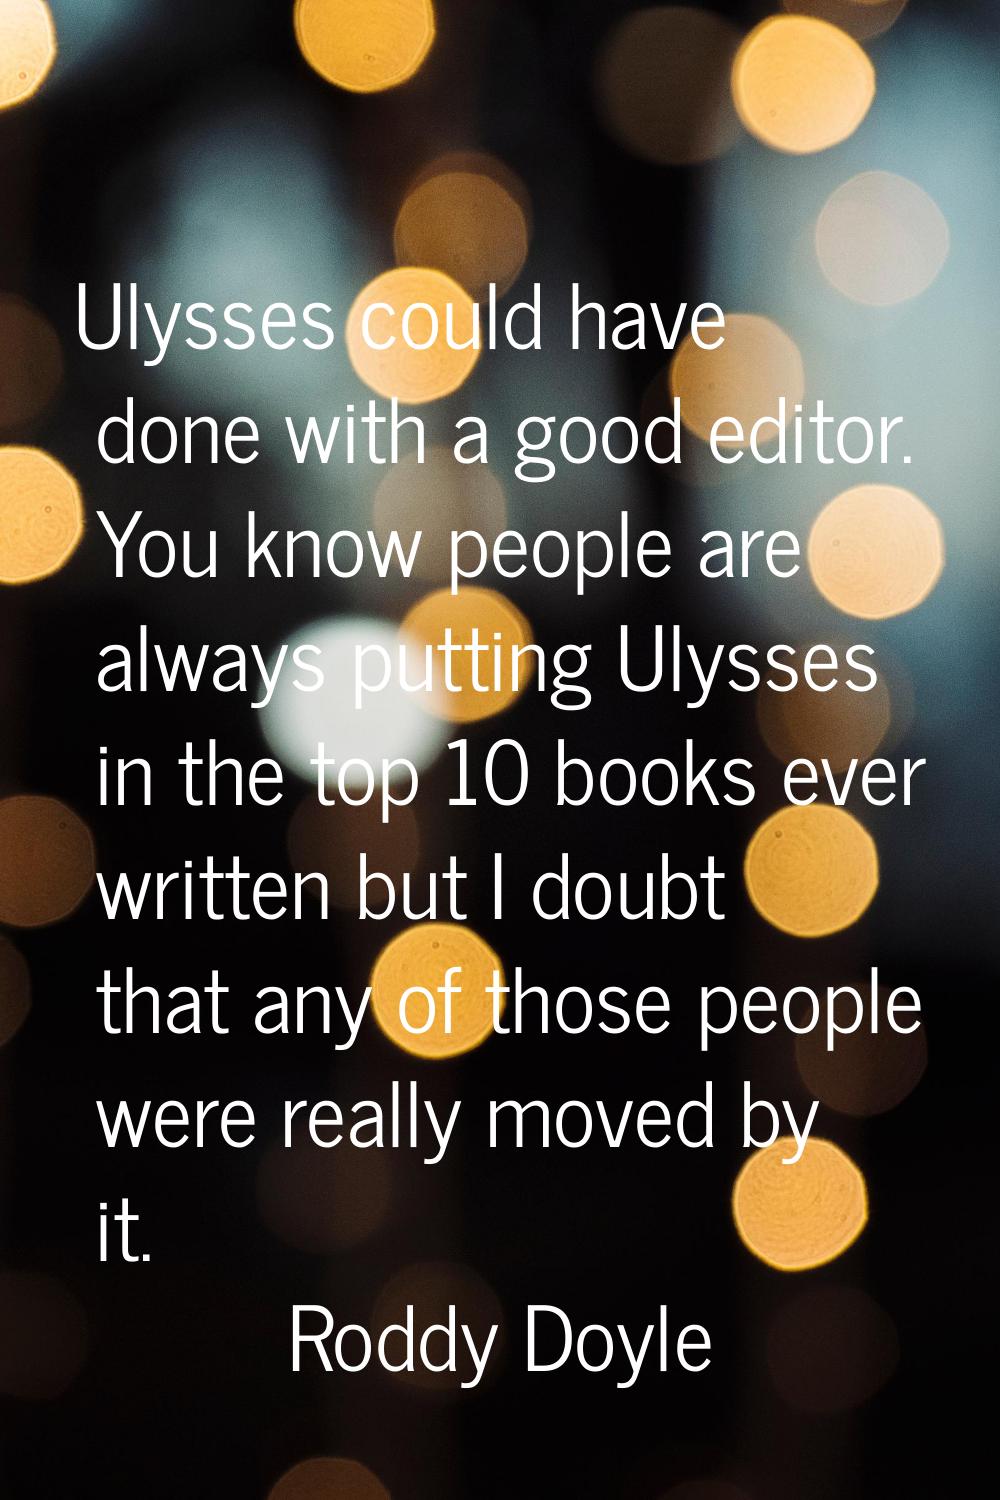 Ulysses could have done with a good editor. You know people are always putting Ulysses in the top 1